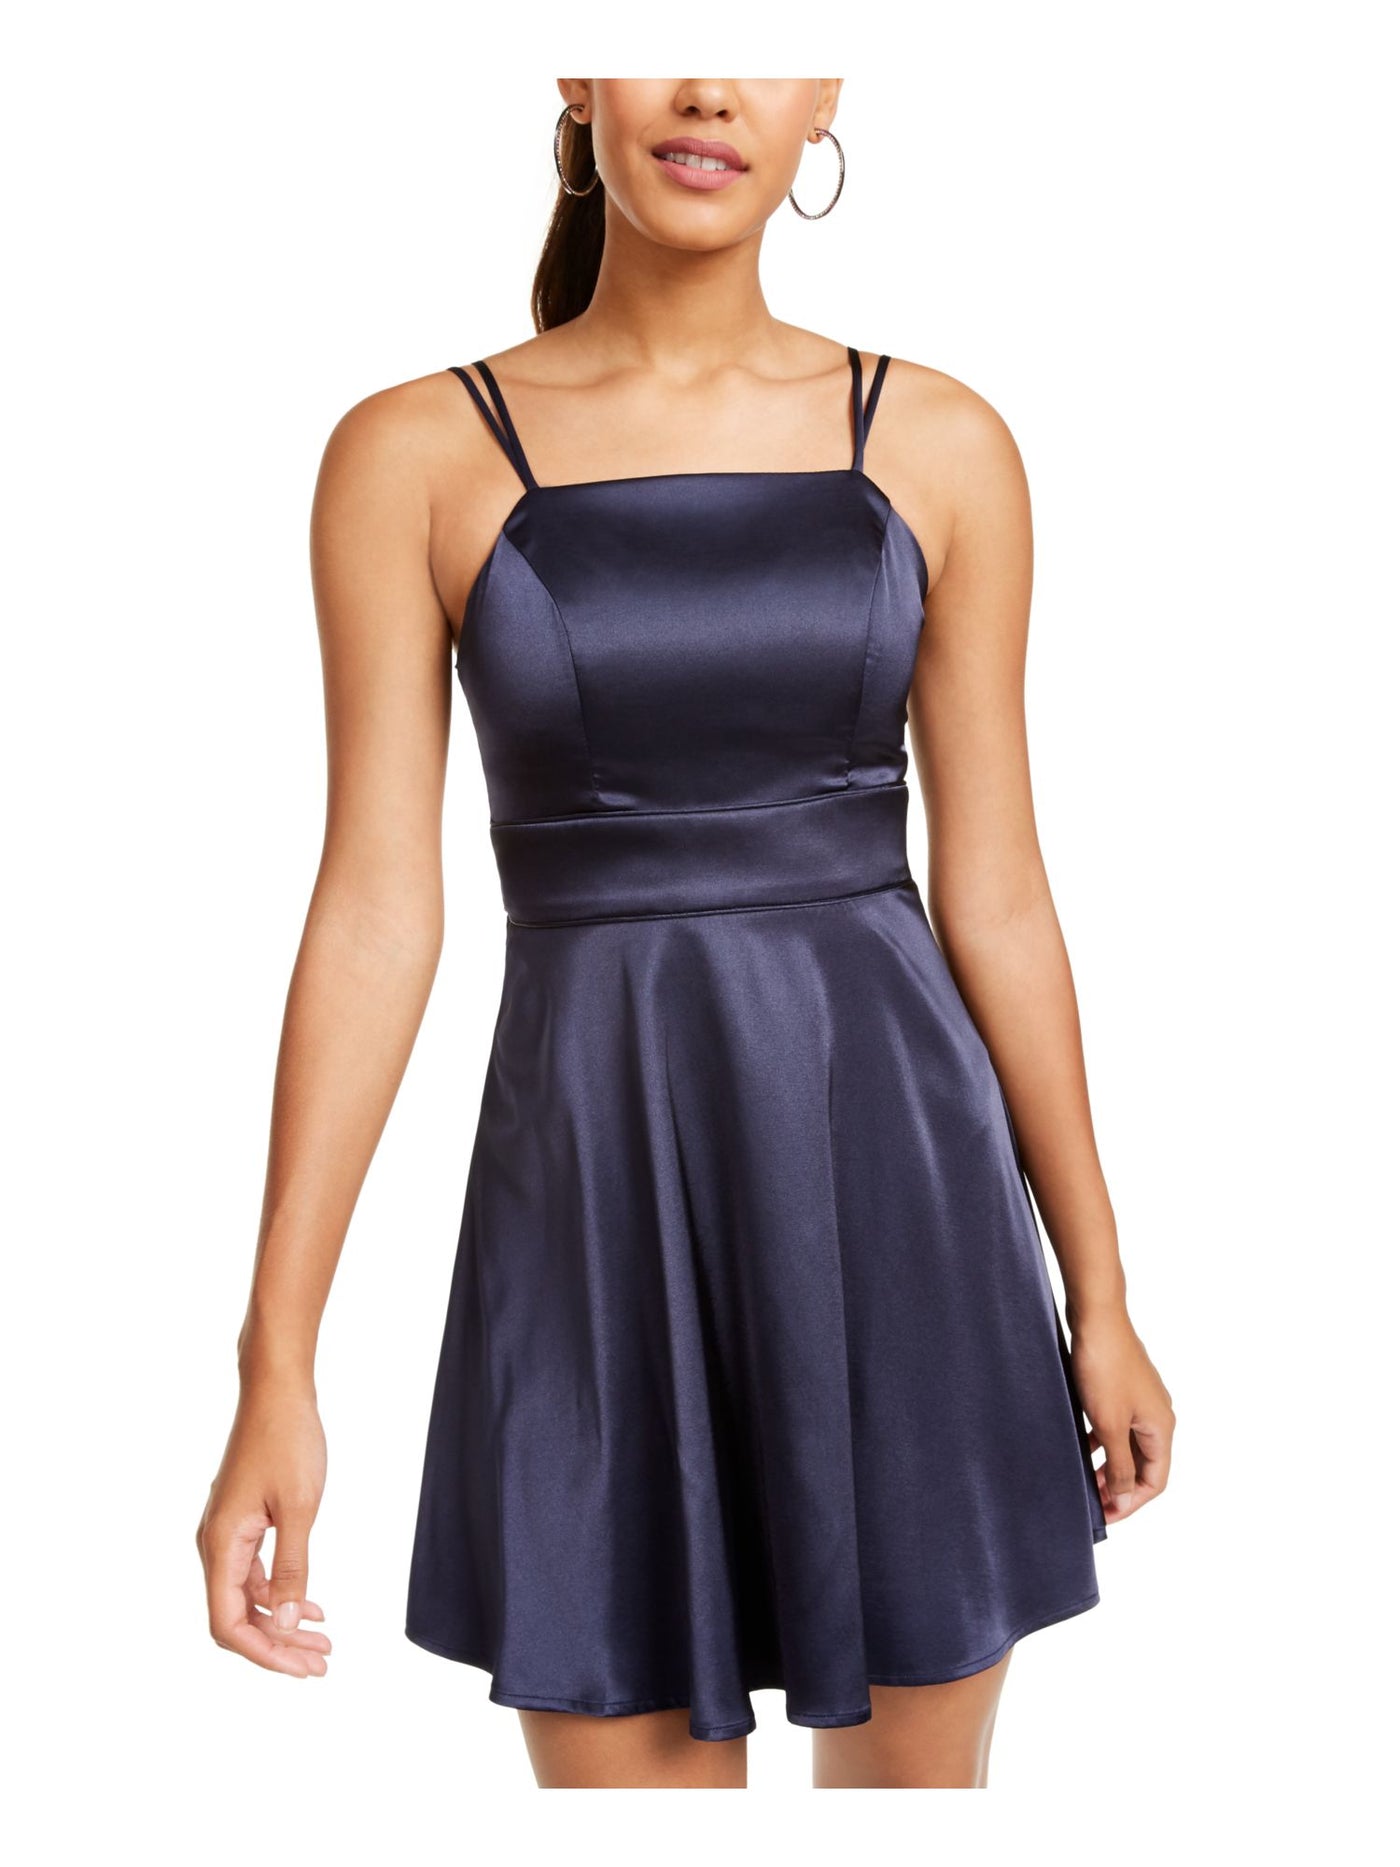 SEQUIN HEARTS Womens Navy Spaghetti Strap Square Neck Short Party Fit + Flare Dress Juniors 7